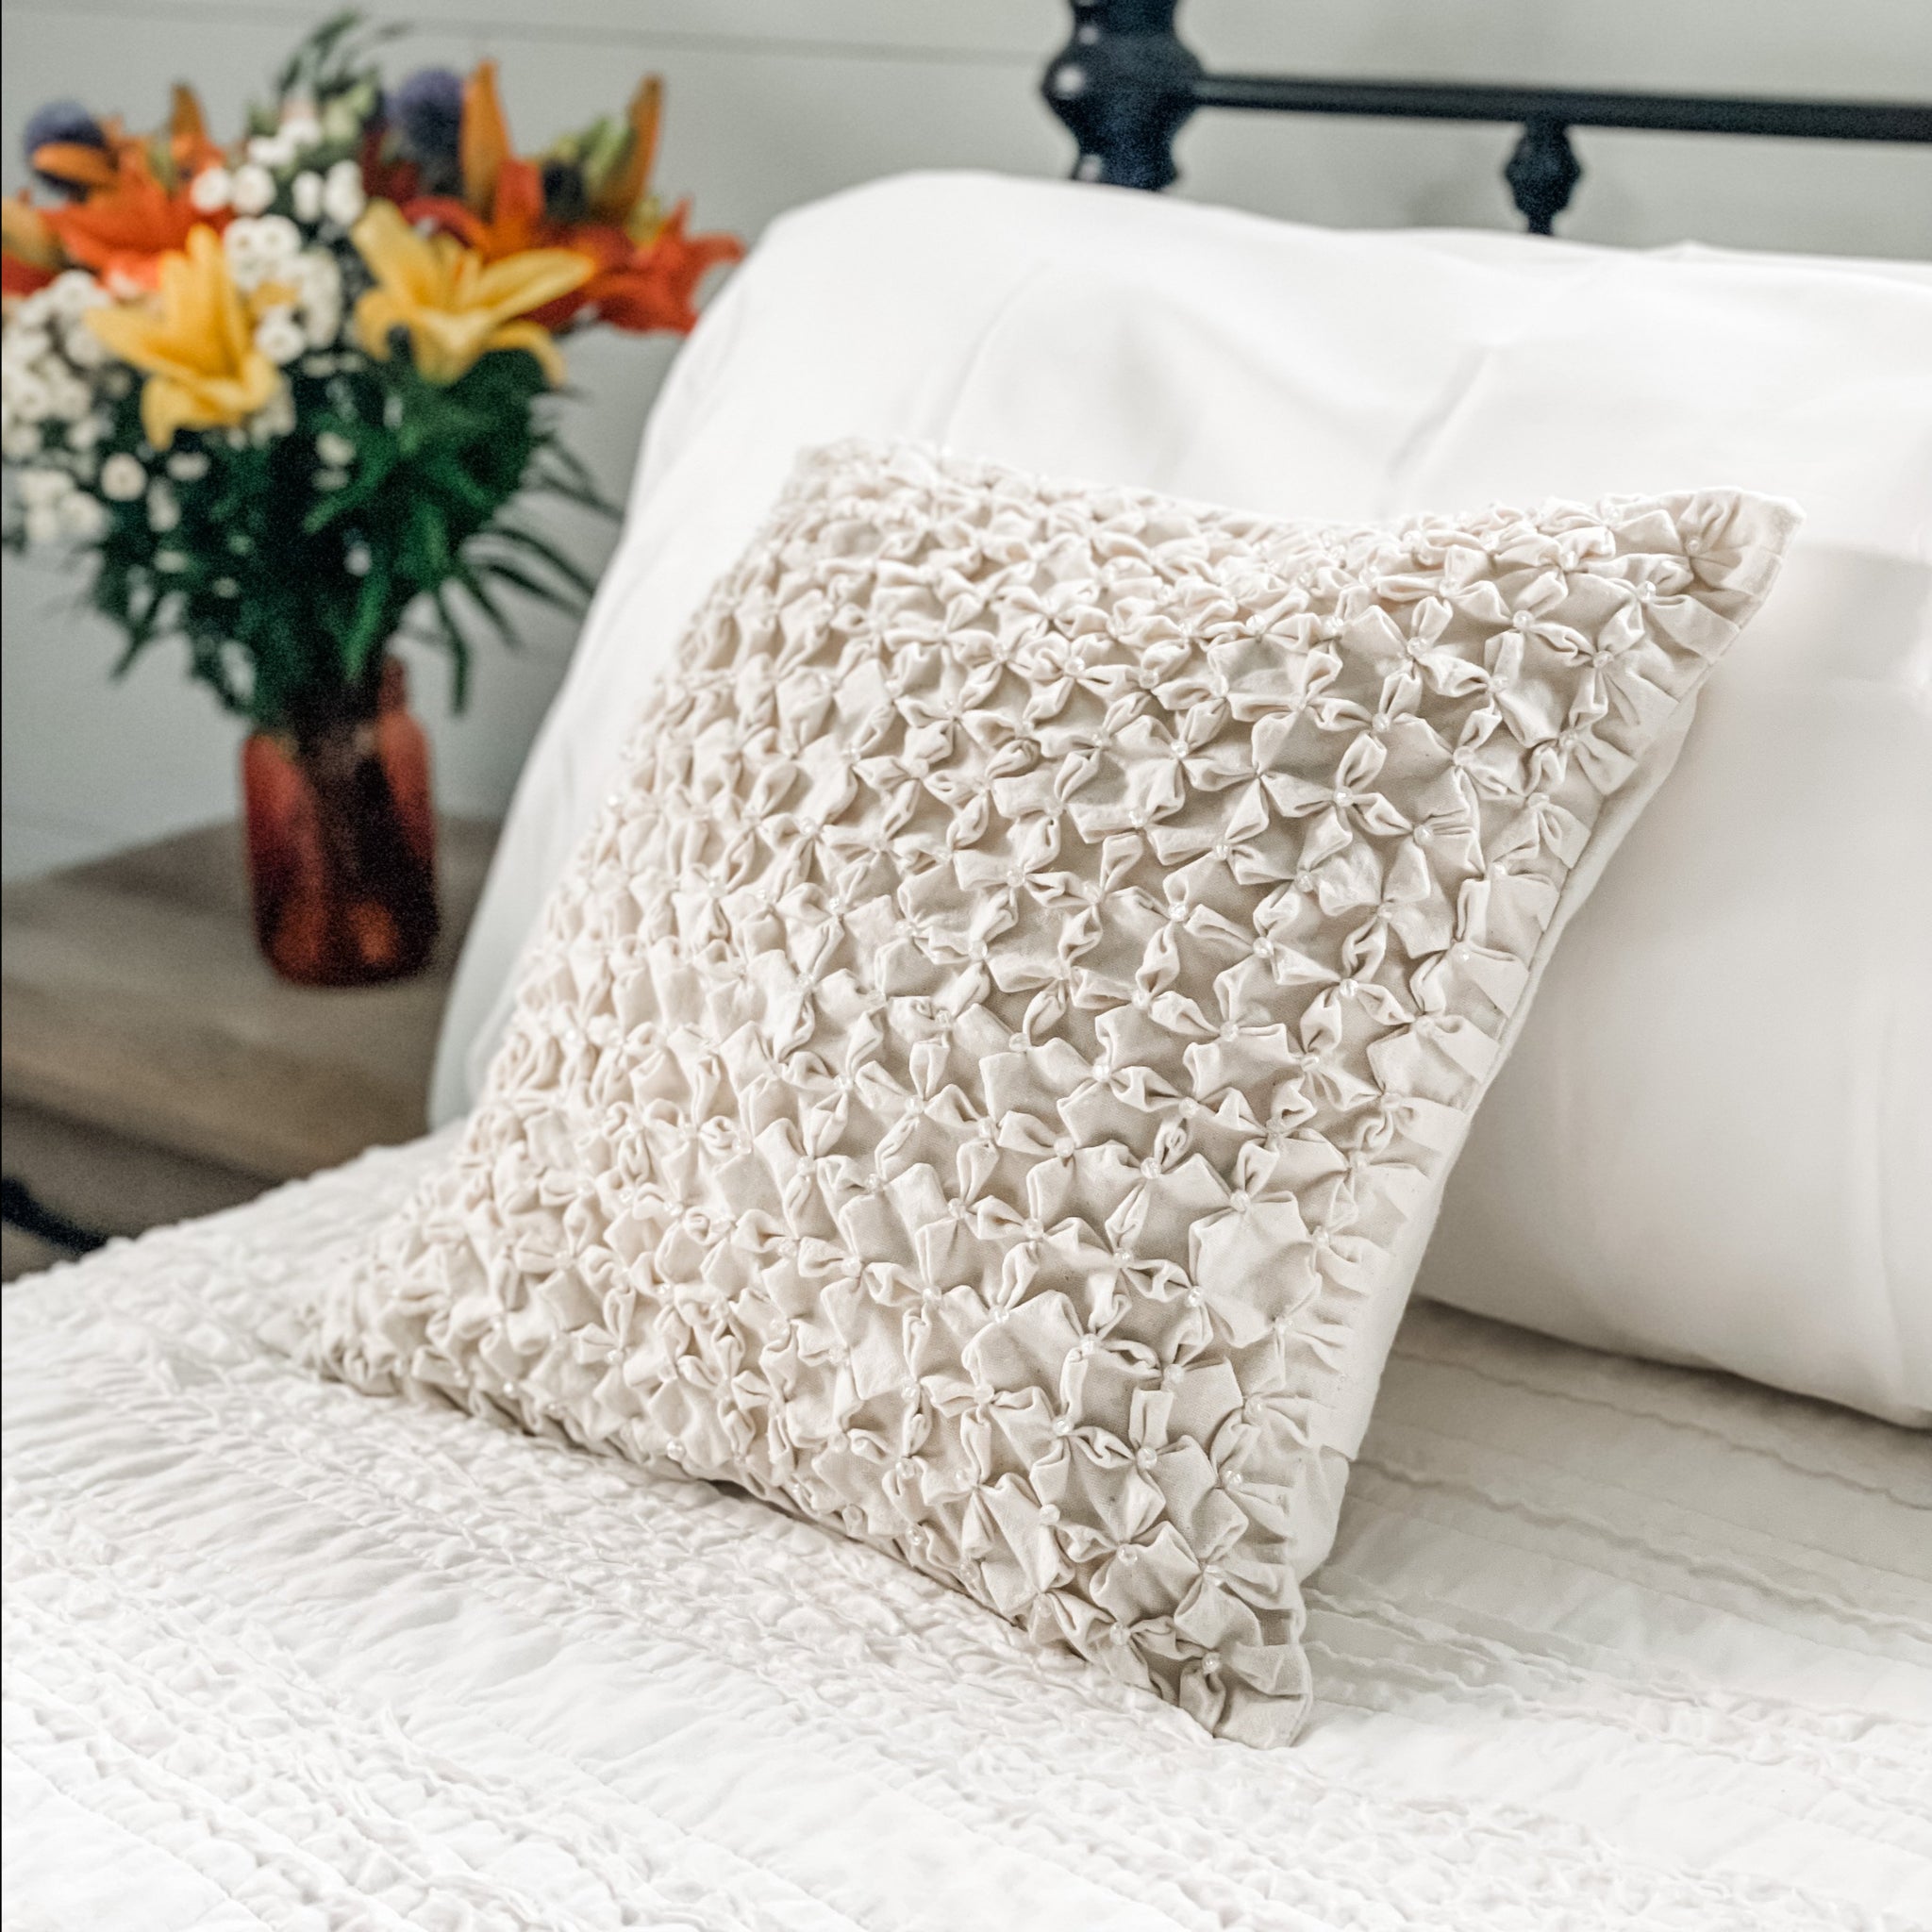 Bead and Tuck Pillow Cover - FMSCMarketplace.org